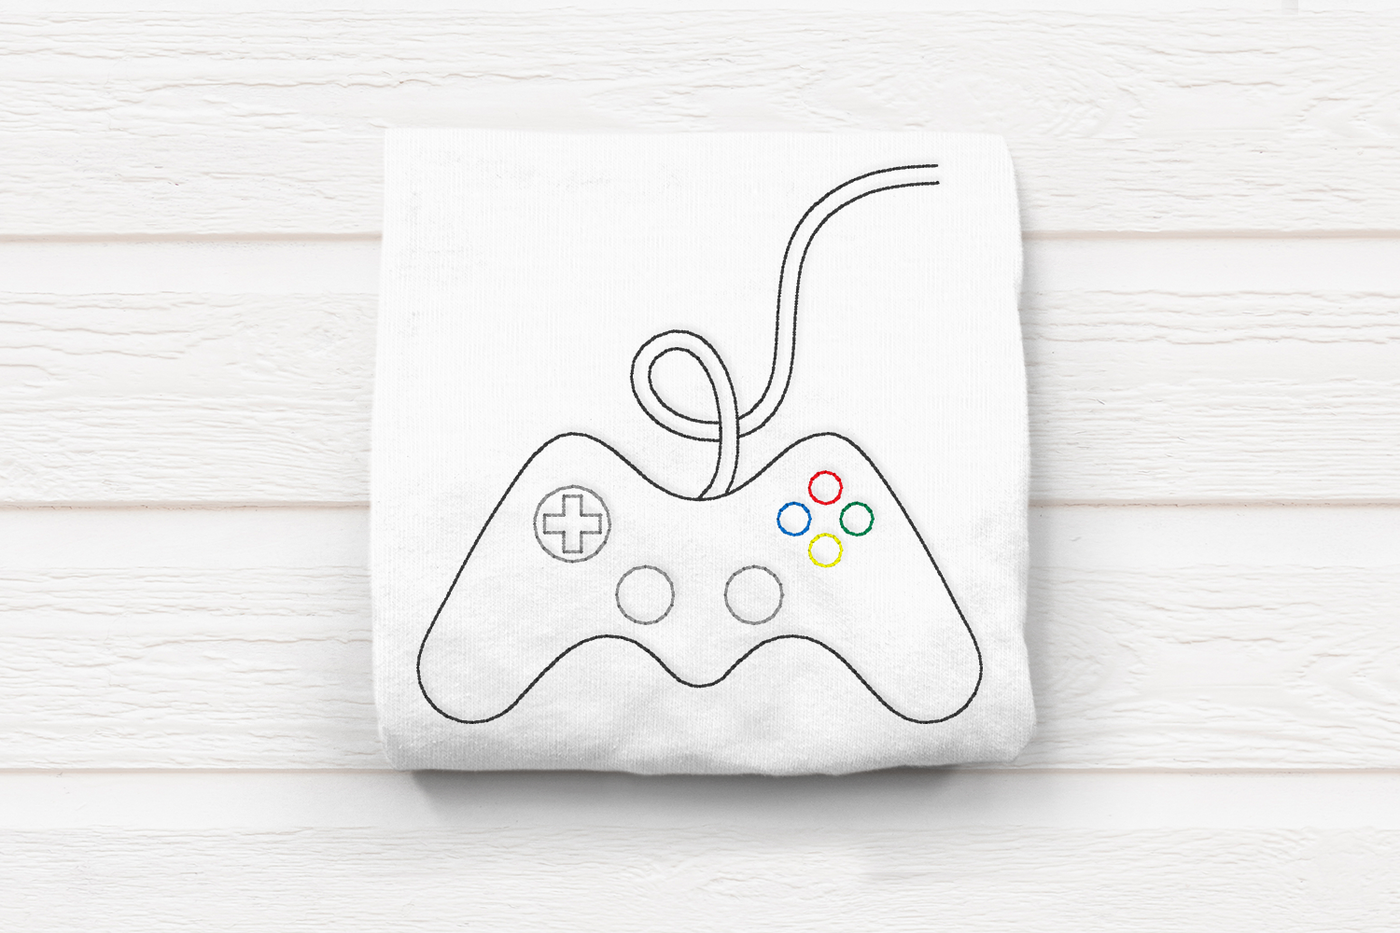 Linework embroidery video game controller